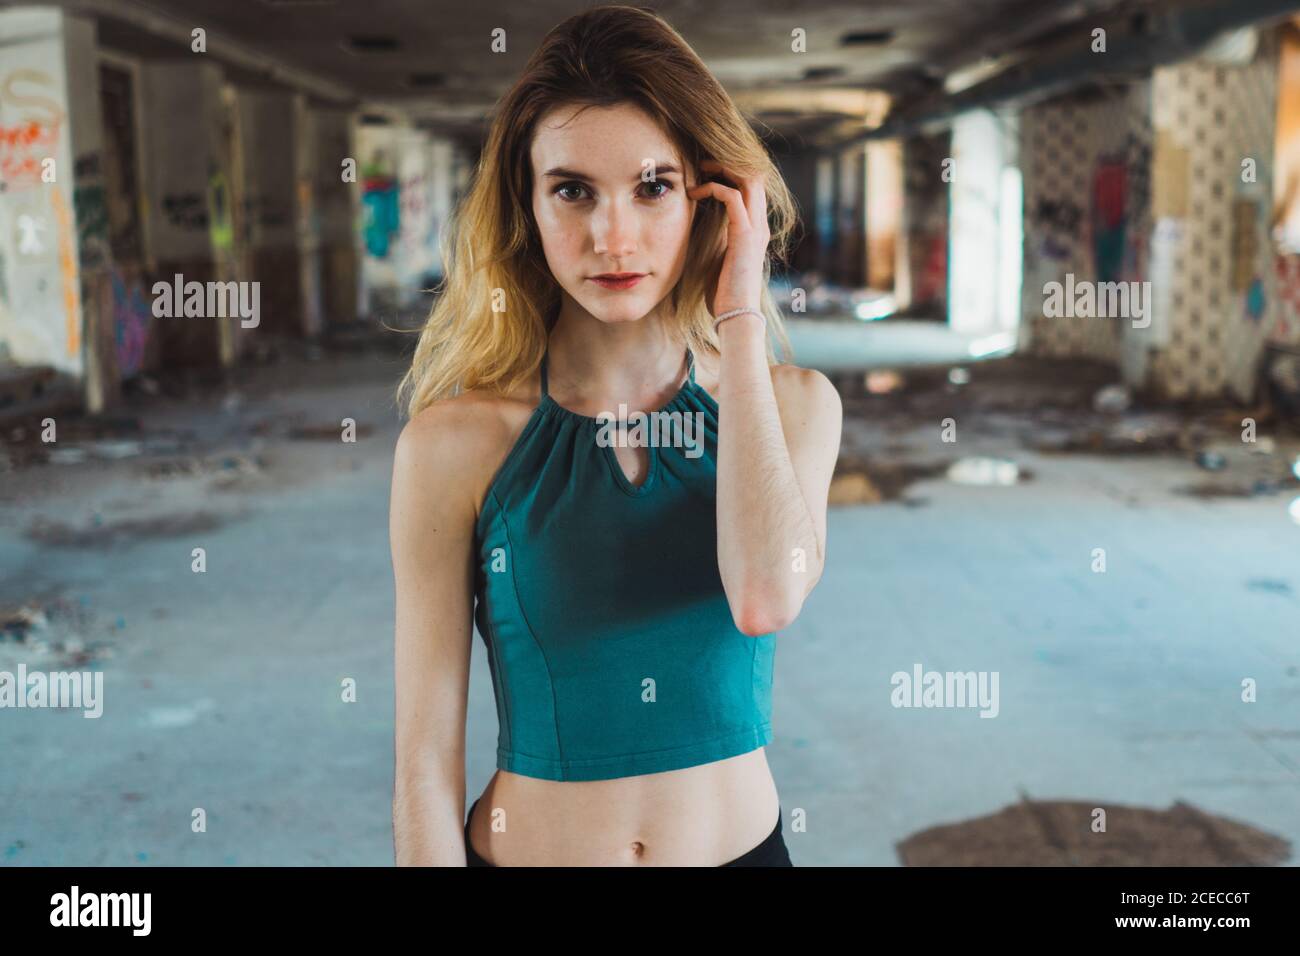 Skinny girl standing in decayed building Stock Photo